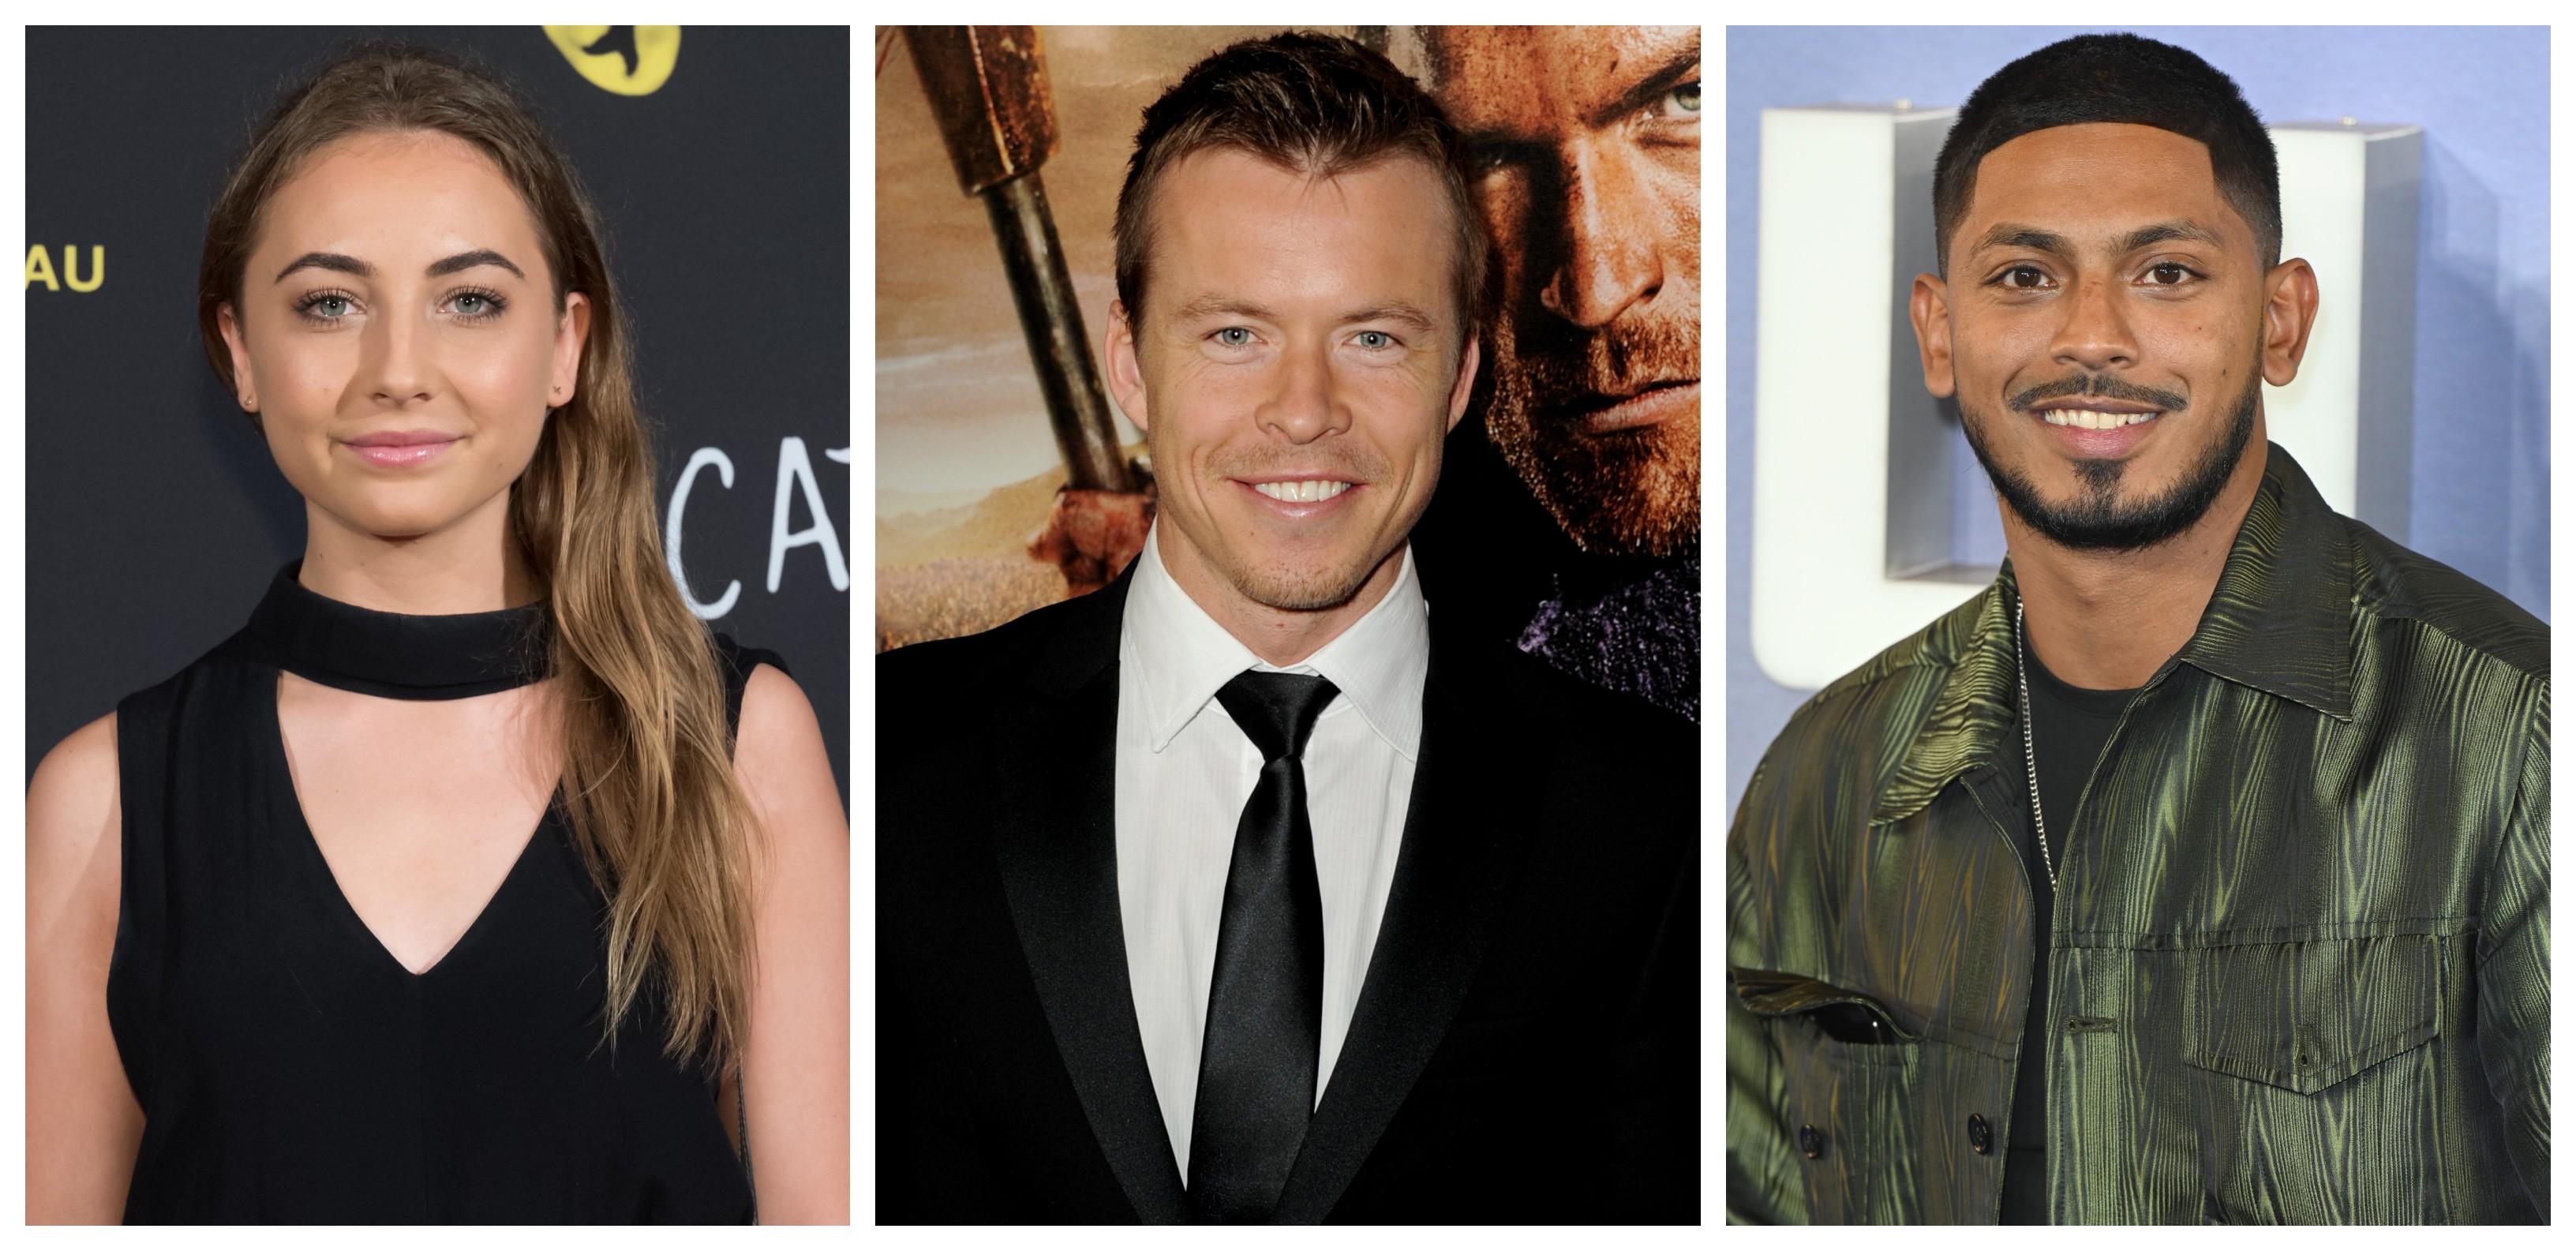 The Cast of NCIS Sydney Has Been Confirmed! Details